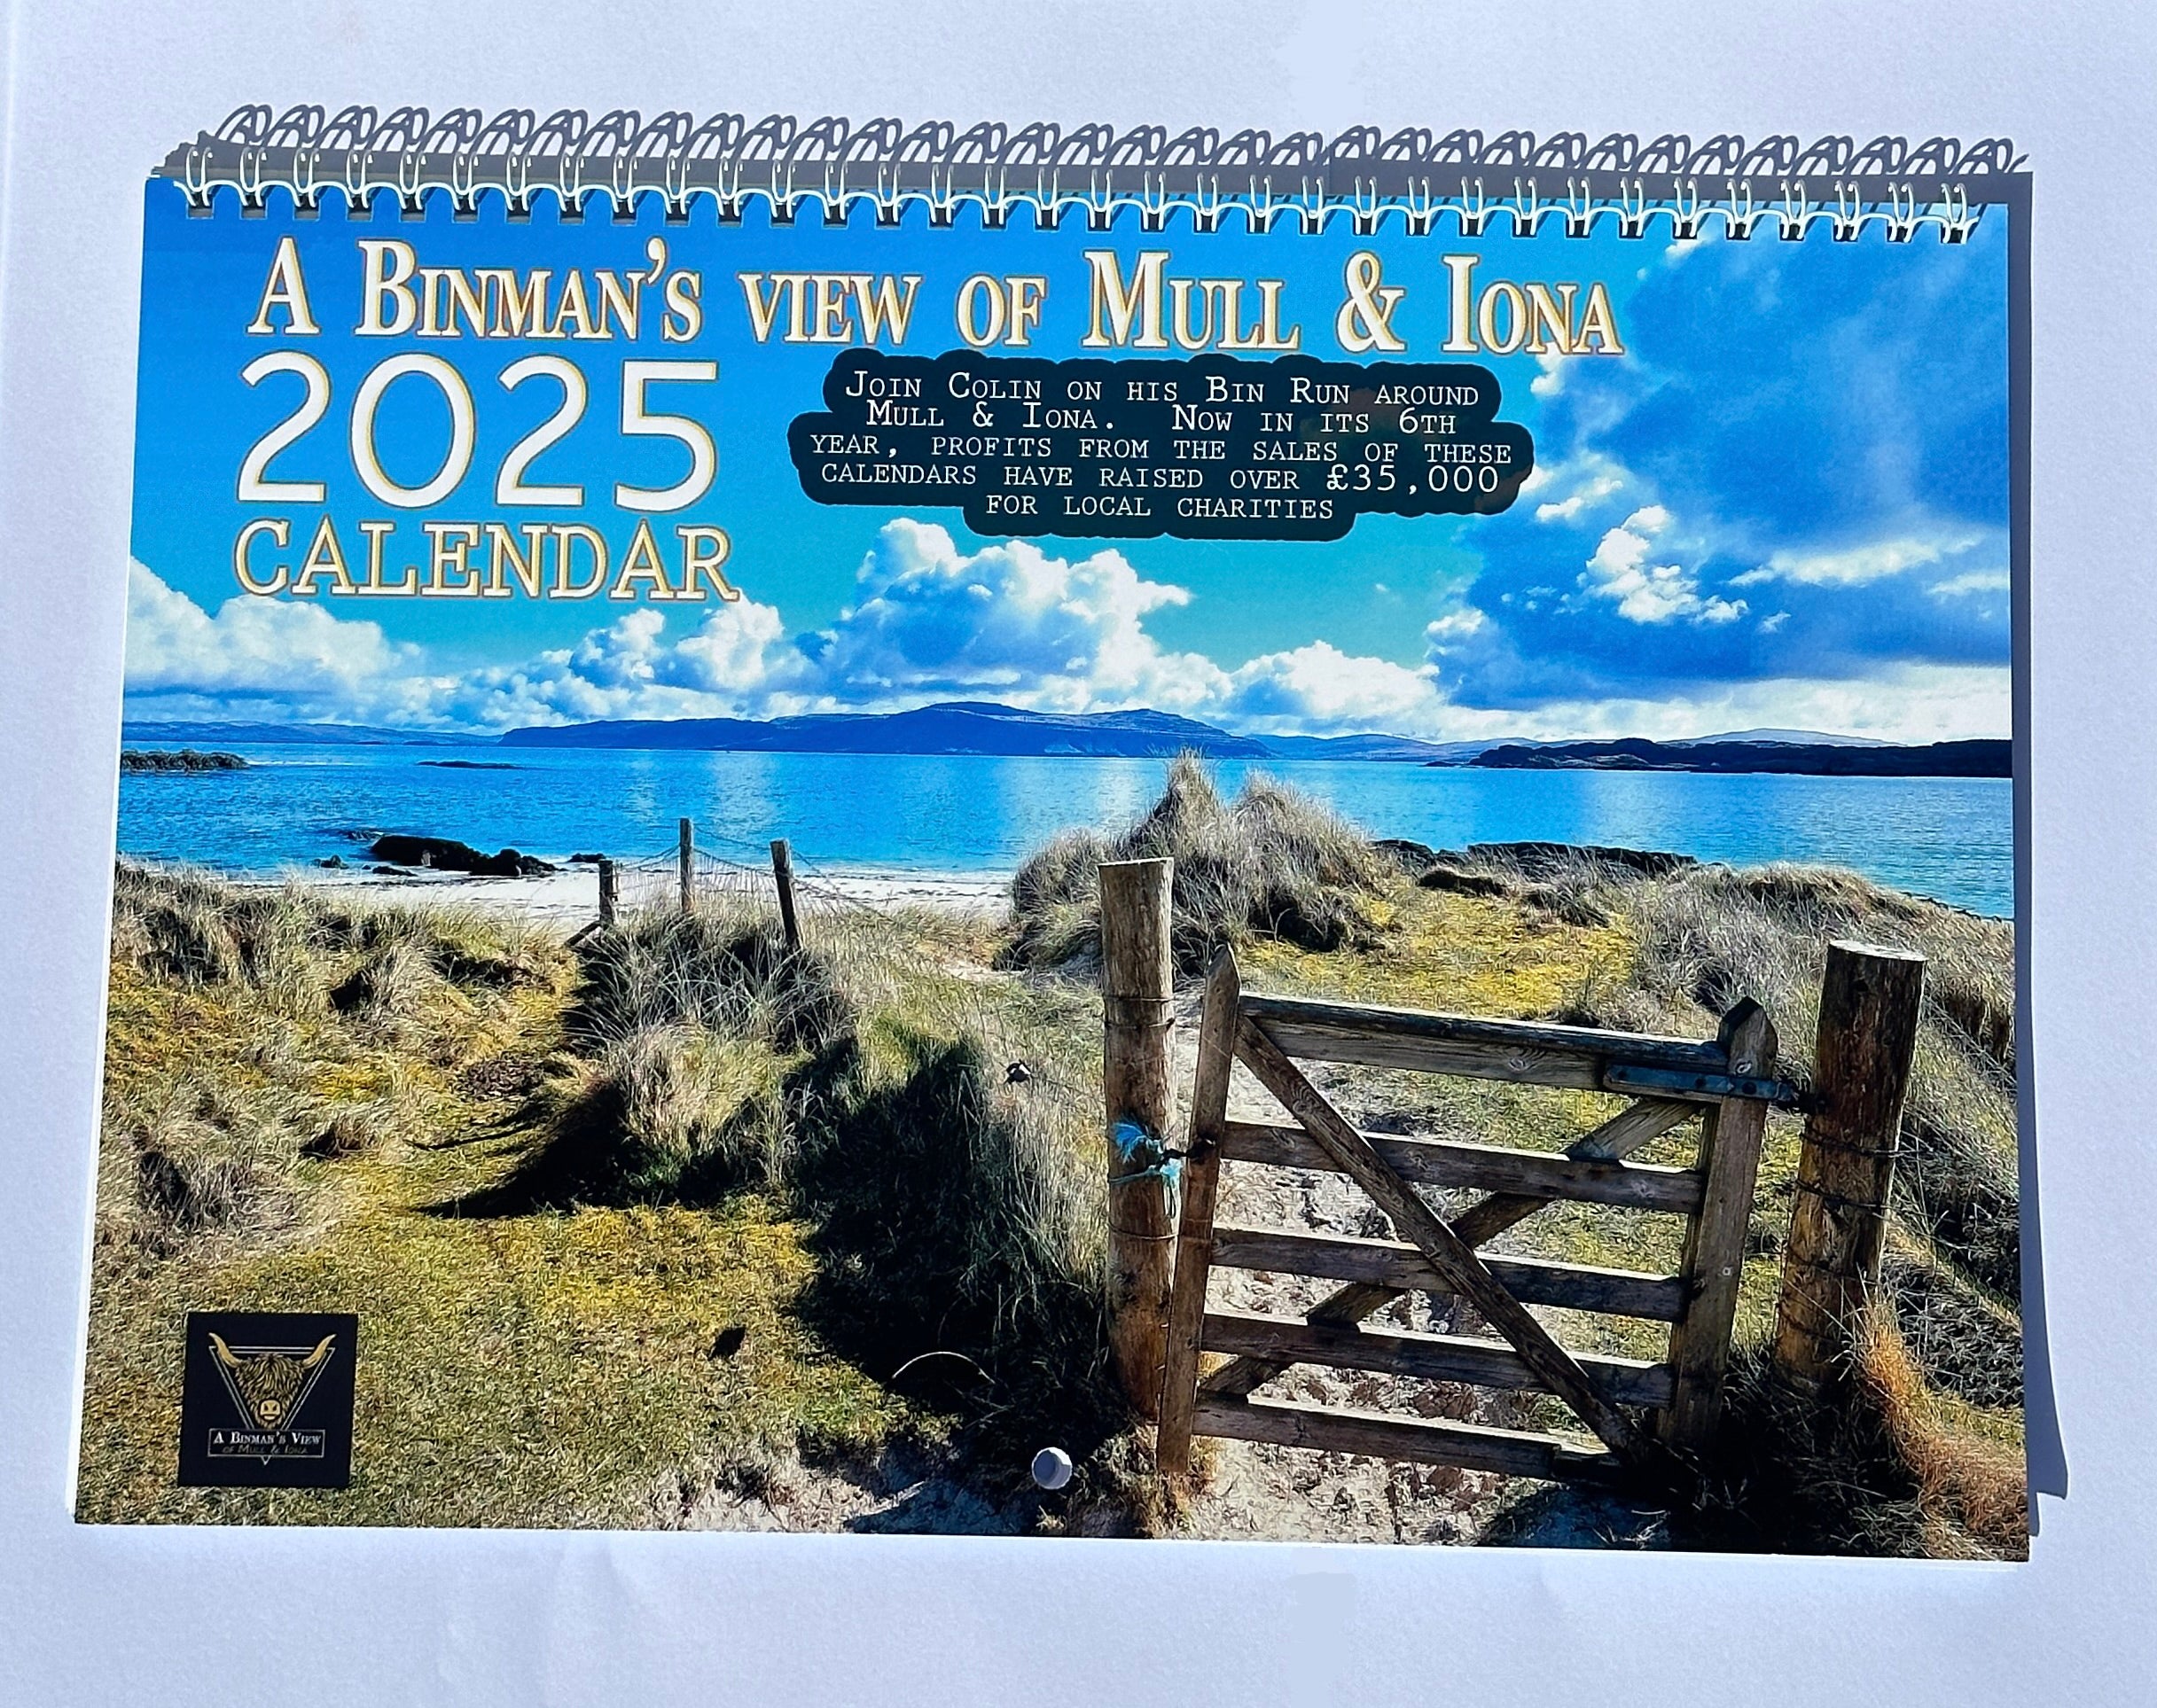 A Binman's View of Mull and Iona 2025 Calendar